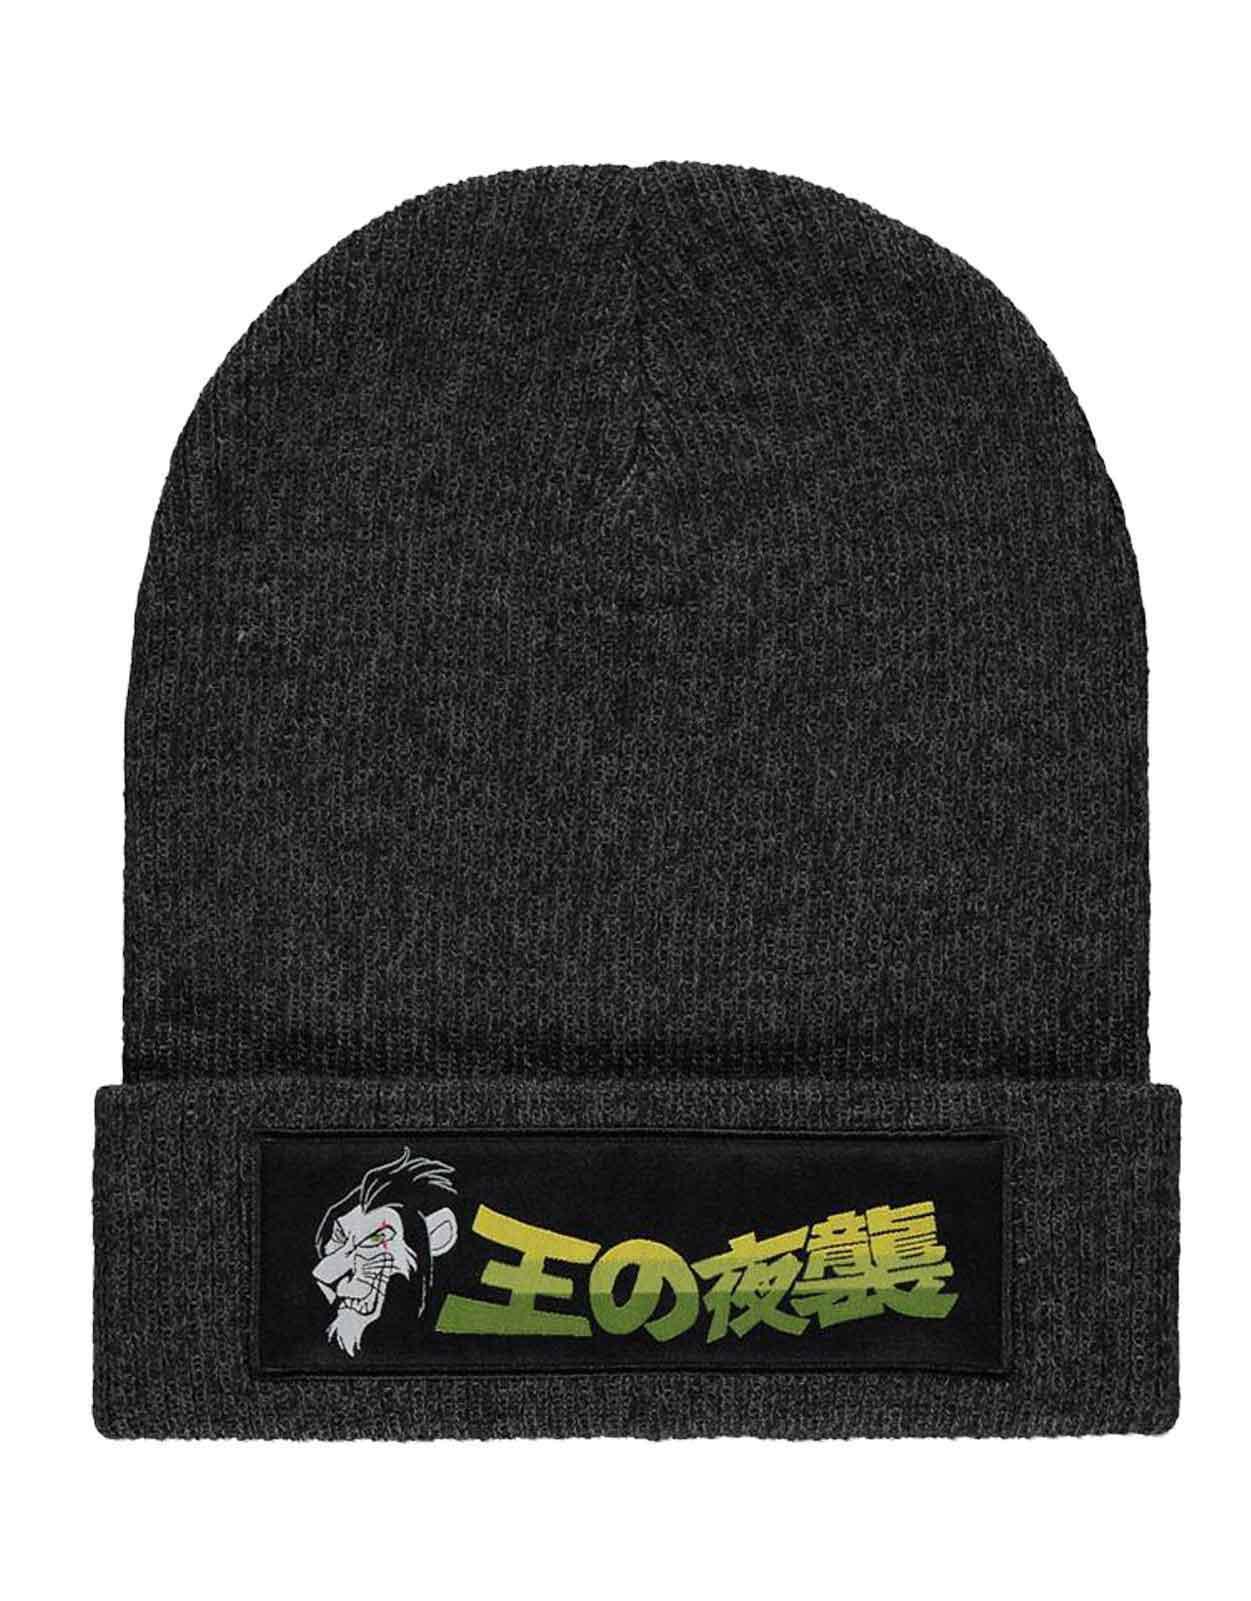 The Lion King Beanie Hat Scar Japanese logo new Official Black One Size